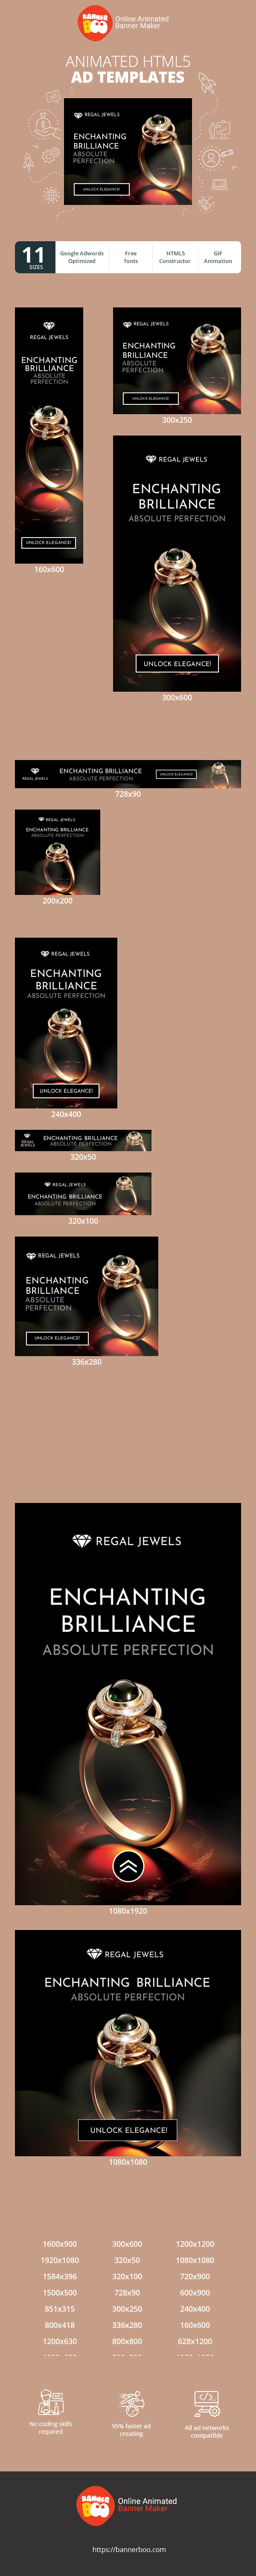 Banner ad template — Enchanting Brilliance Absolute Perfection — Jewelry